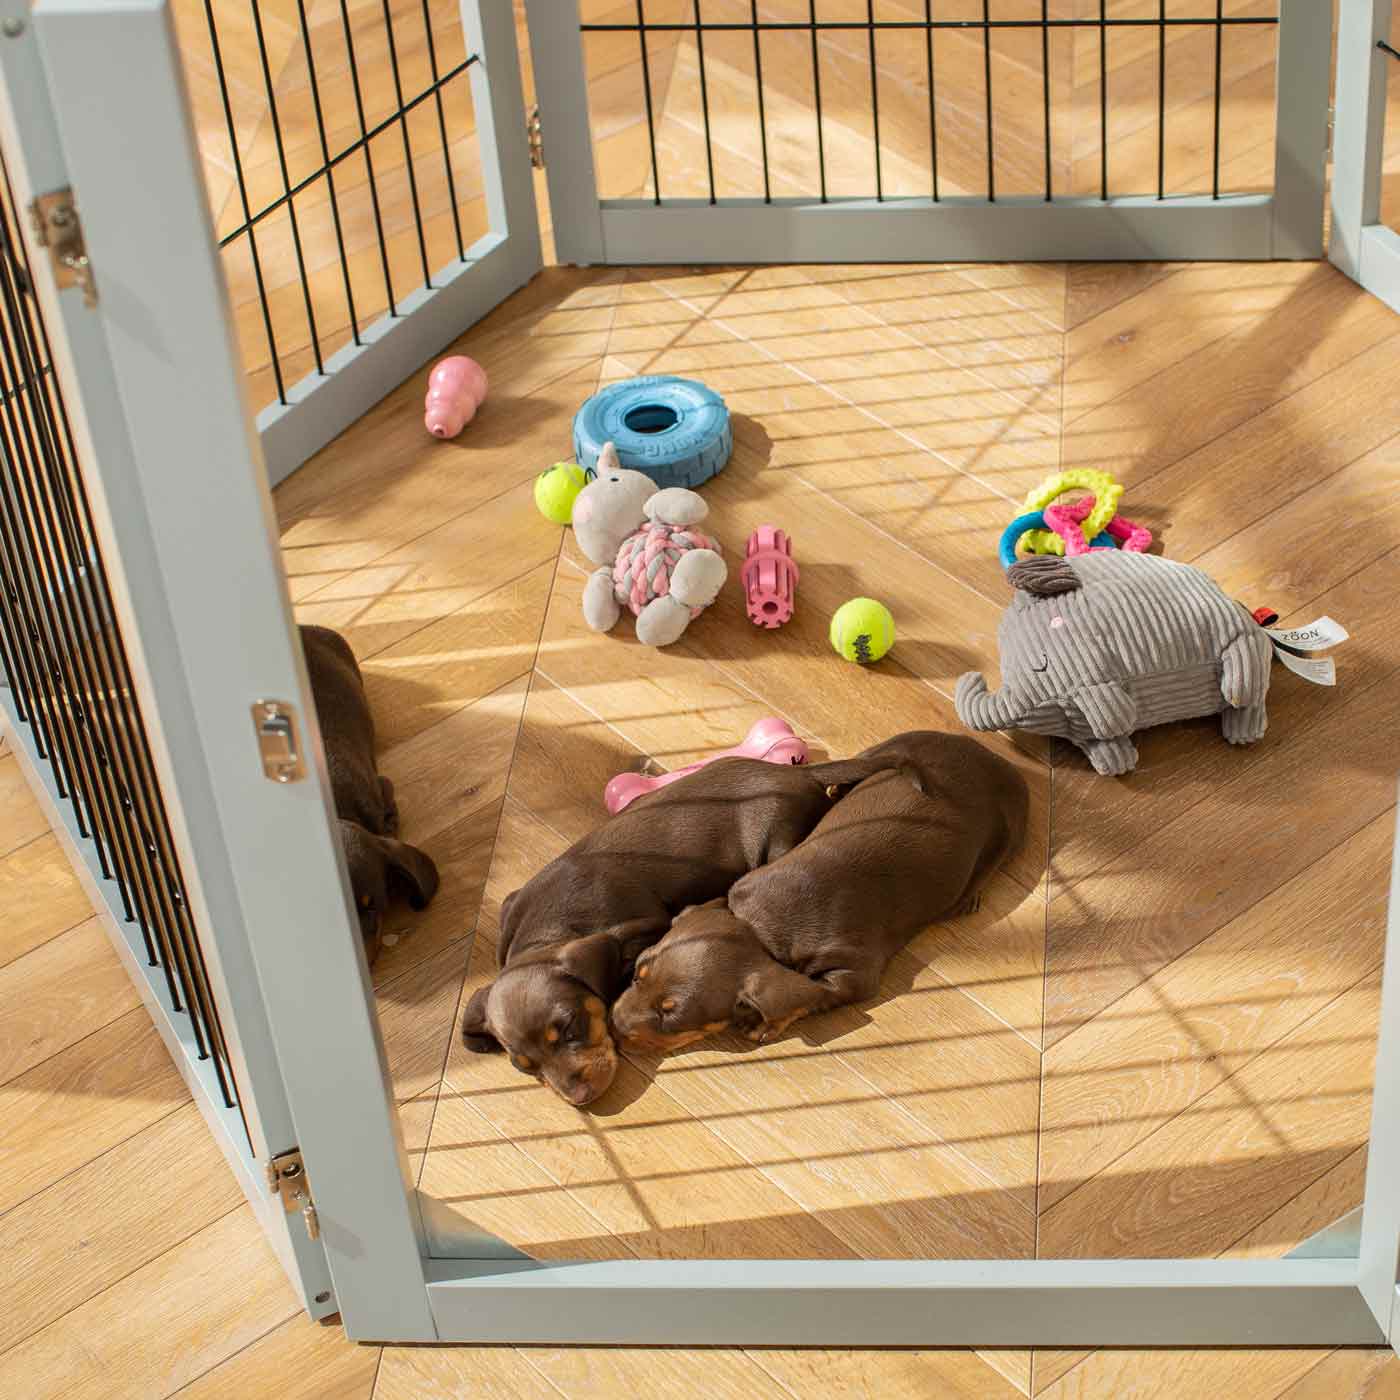 Ensure The Ultimate Puppy Safety with Our Heavy Duty Wooden Puppy Play Pen, Crafted to Take Your Pet Right Through Maturity! Powder Coated to Be Extra Hardwearing! 6 panels that are 80.5cm high! Available To Now at Lords & Labradors US